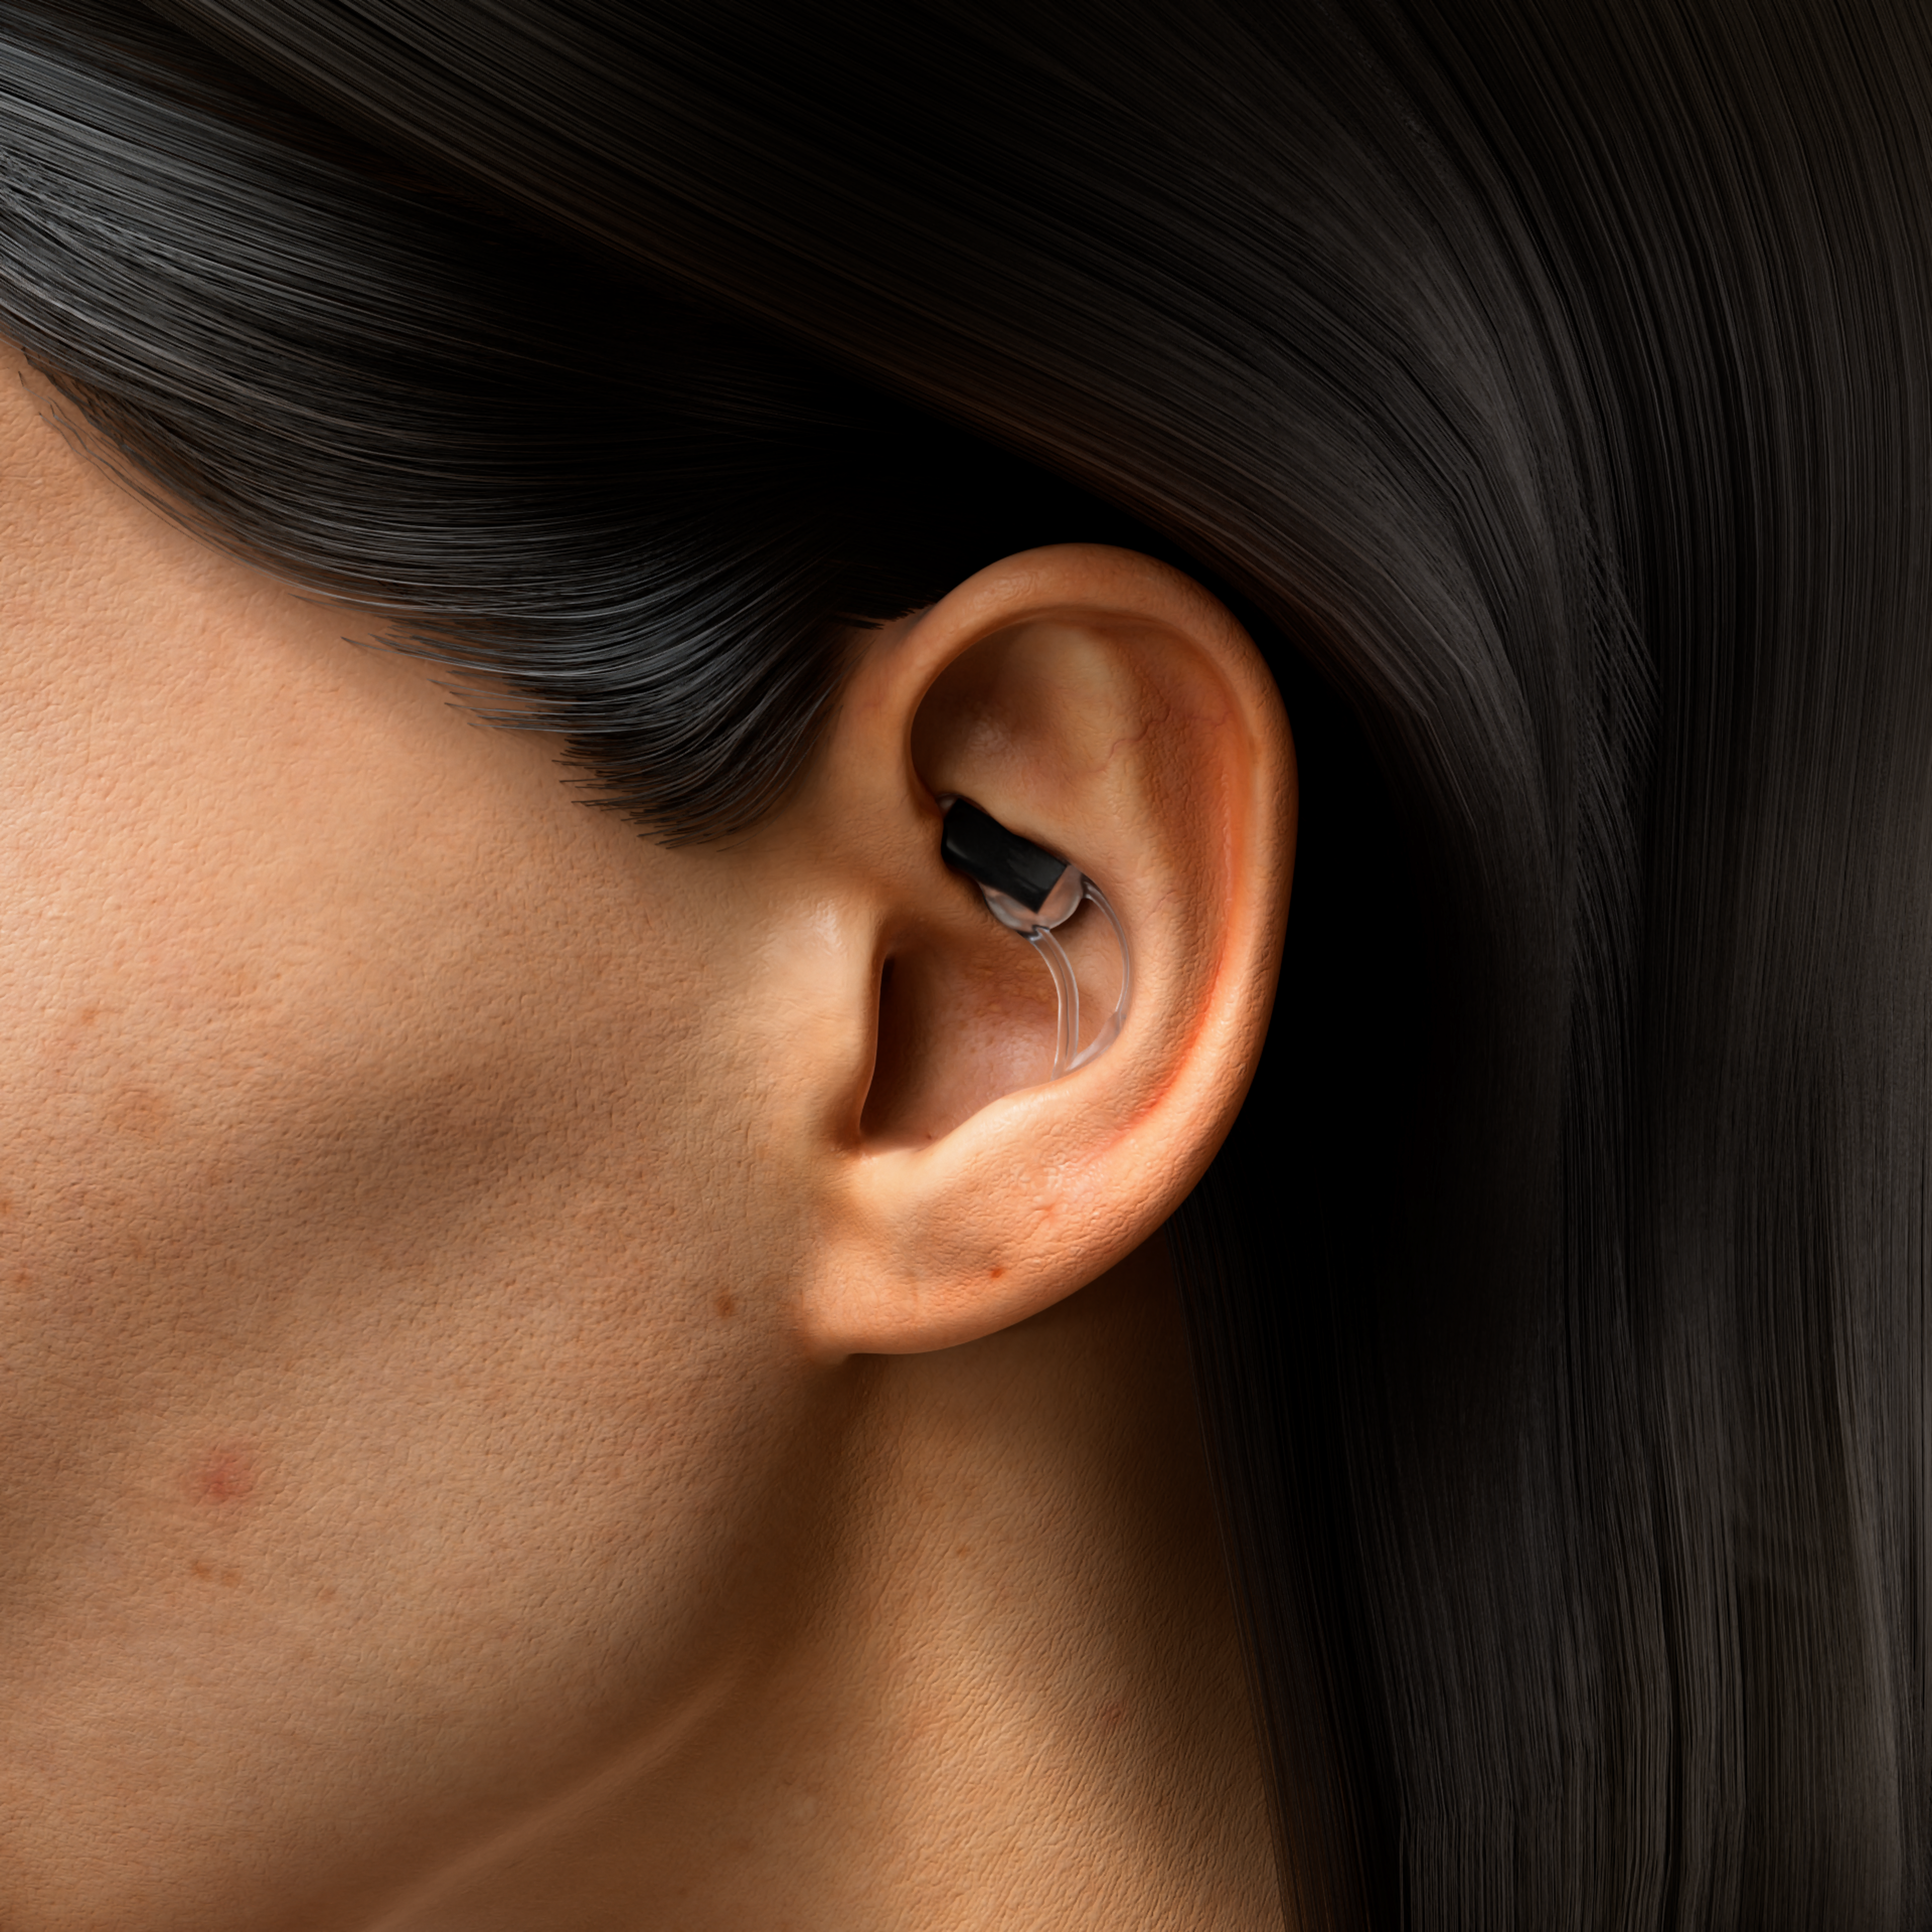 STAT Health Launches In-Ear Wearable to Measure Blood Flow to the Head